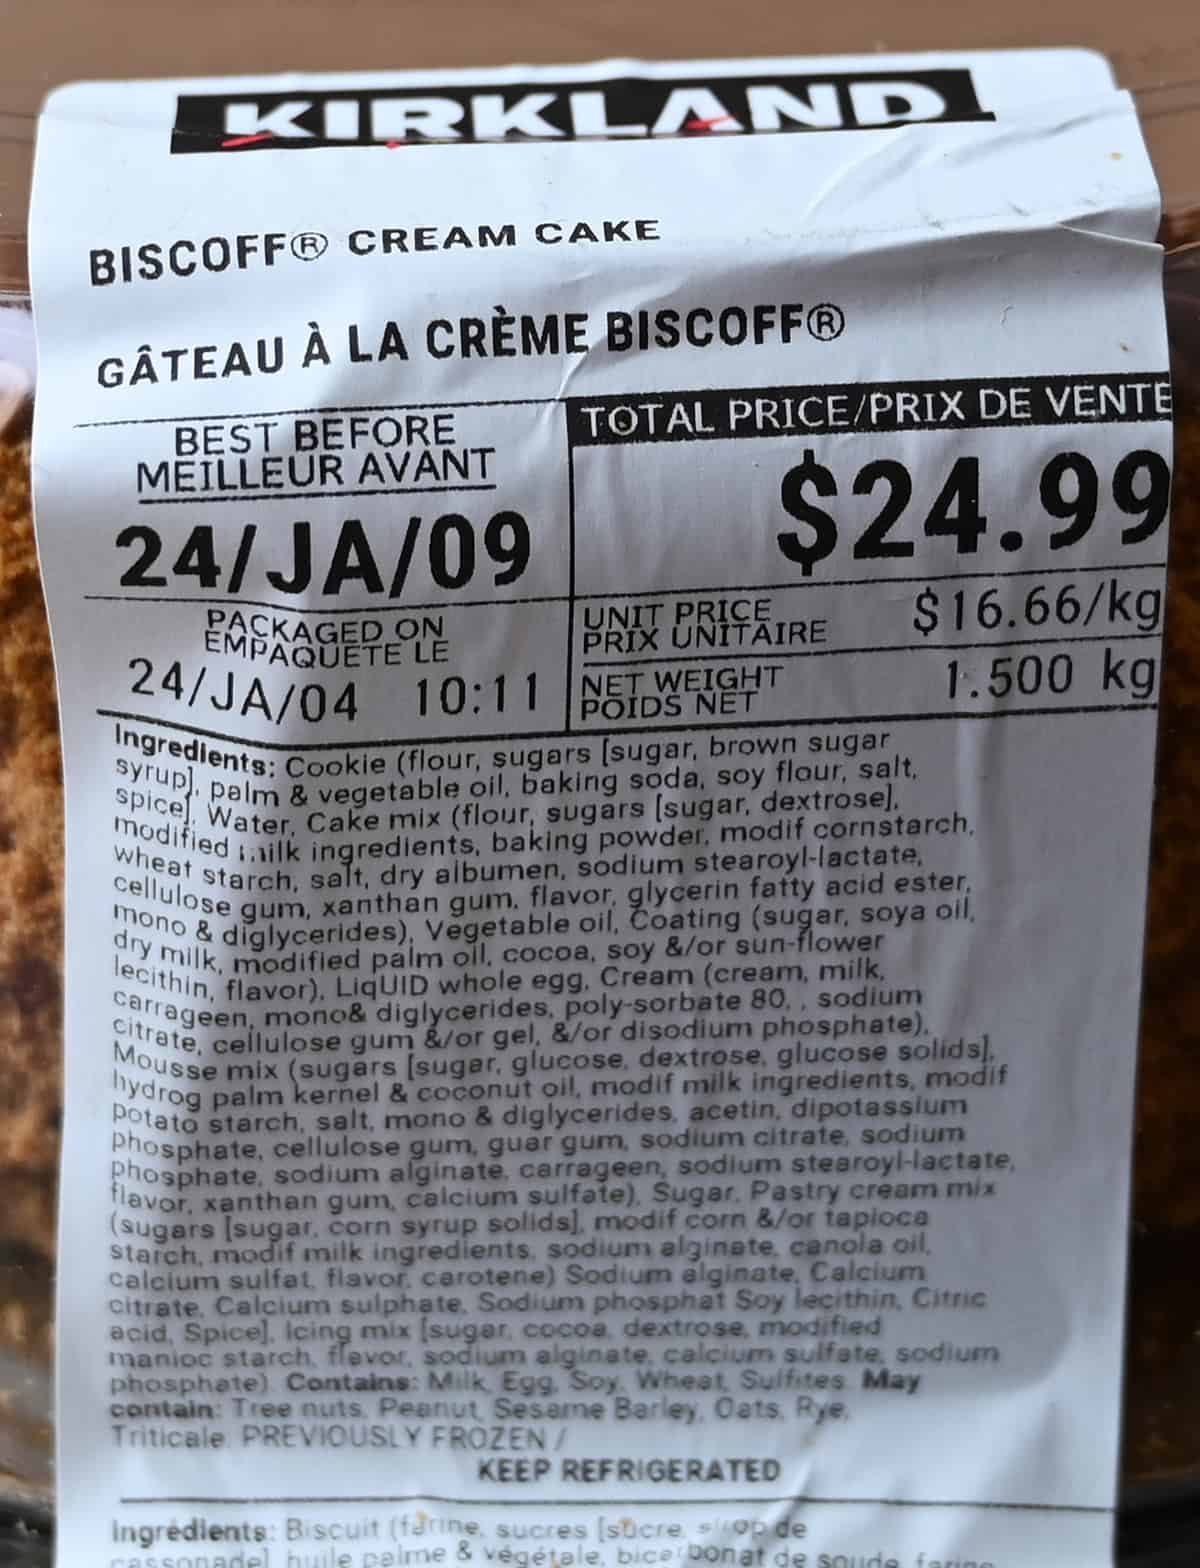 Closeup image of the front label on the cake showing best before date, ingredients and cost.